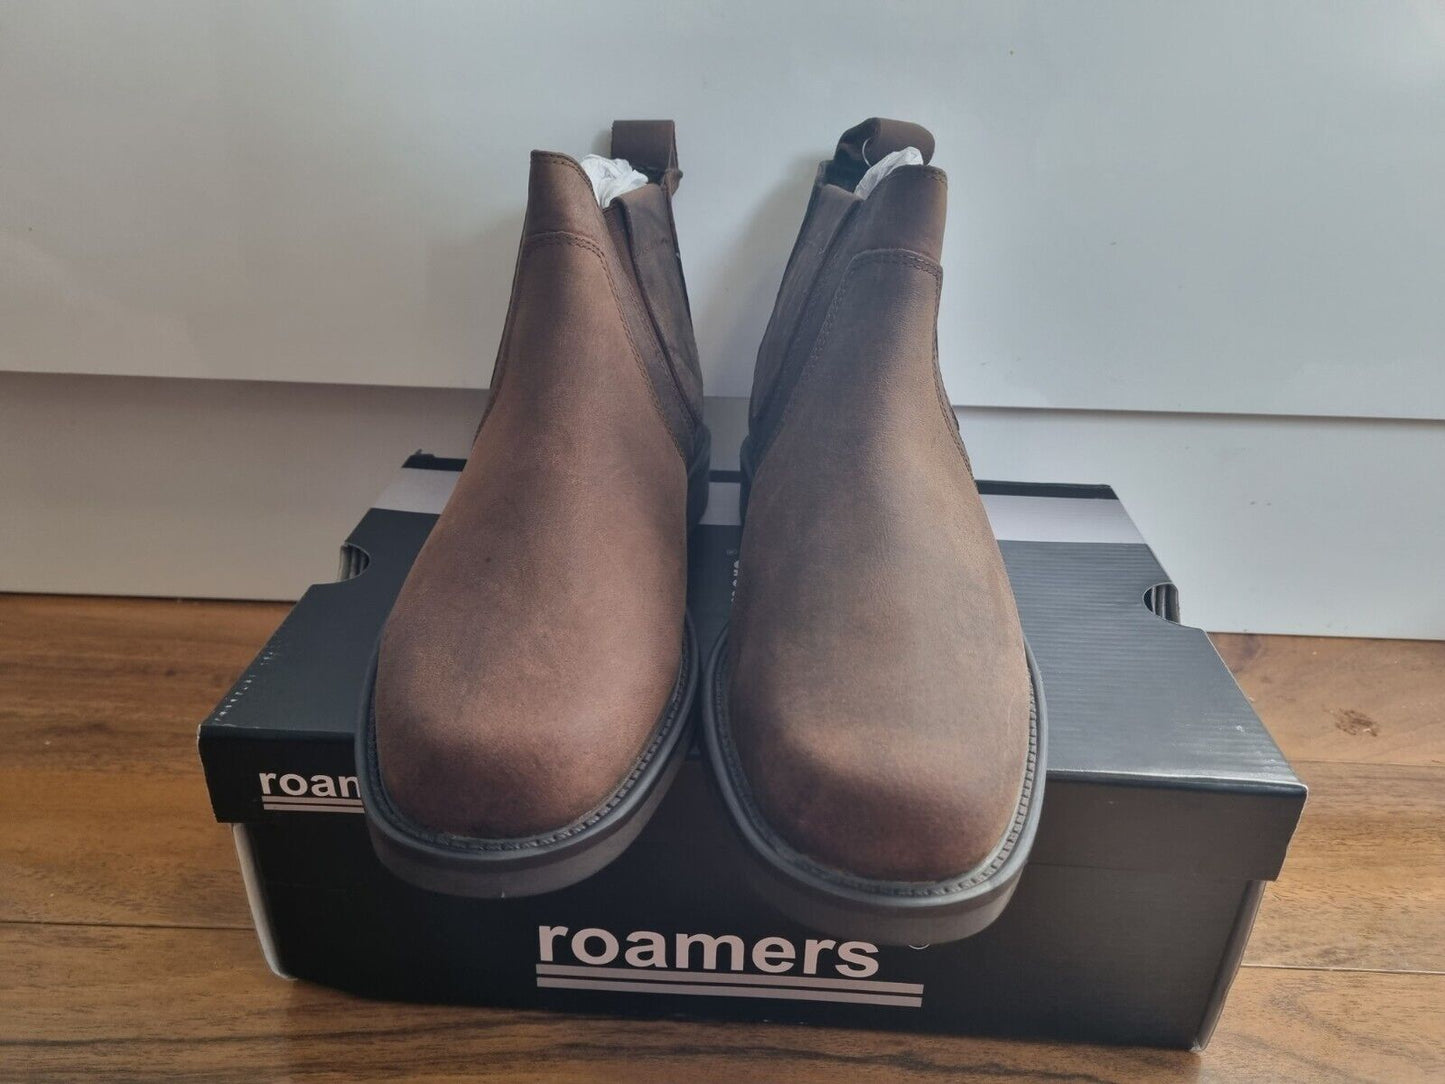 Chelsea Boot by Roamers - Crazy Horse Brown Leather (M556B)